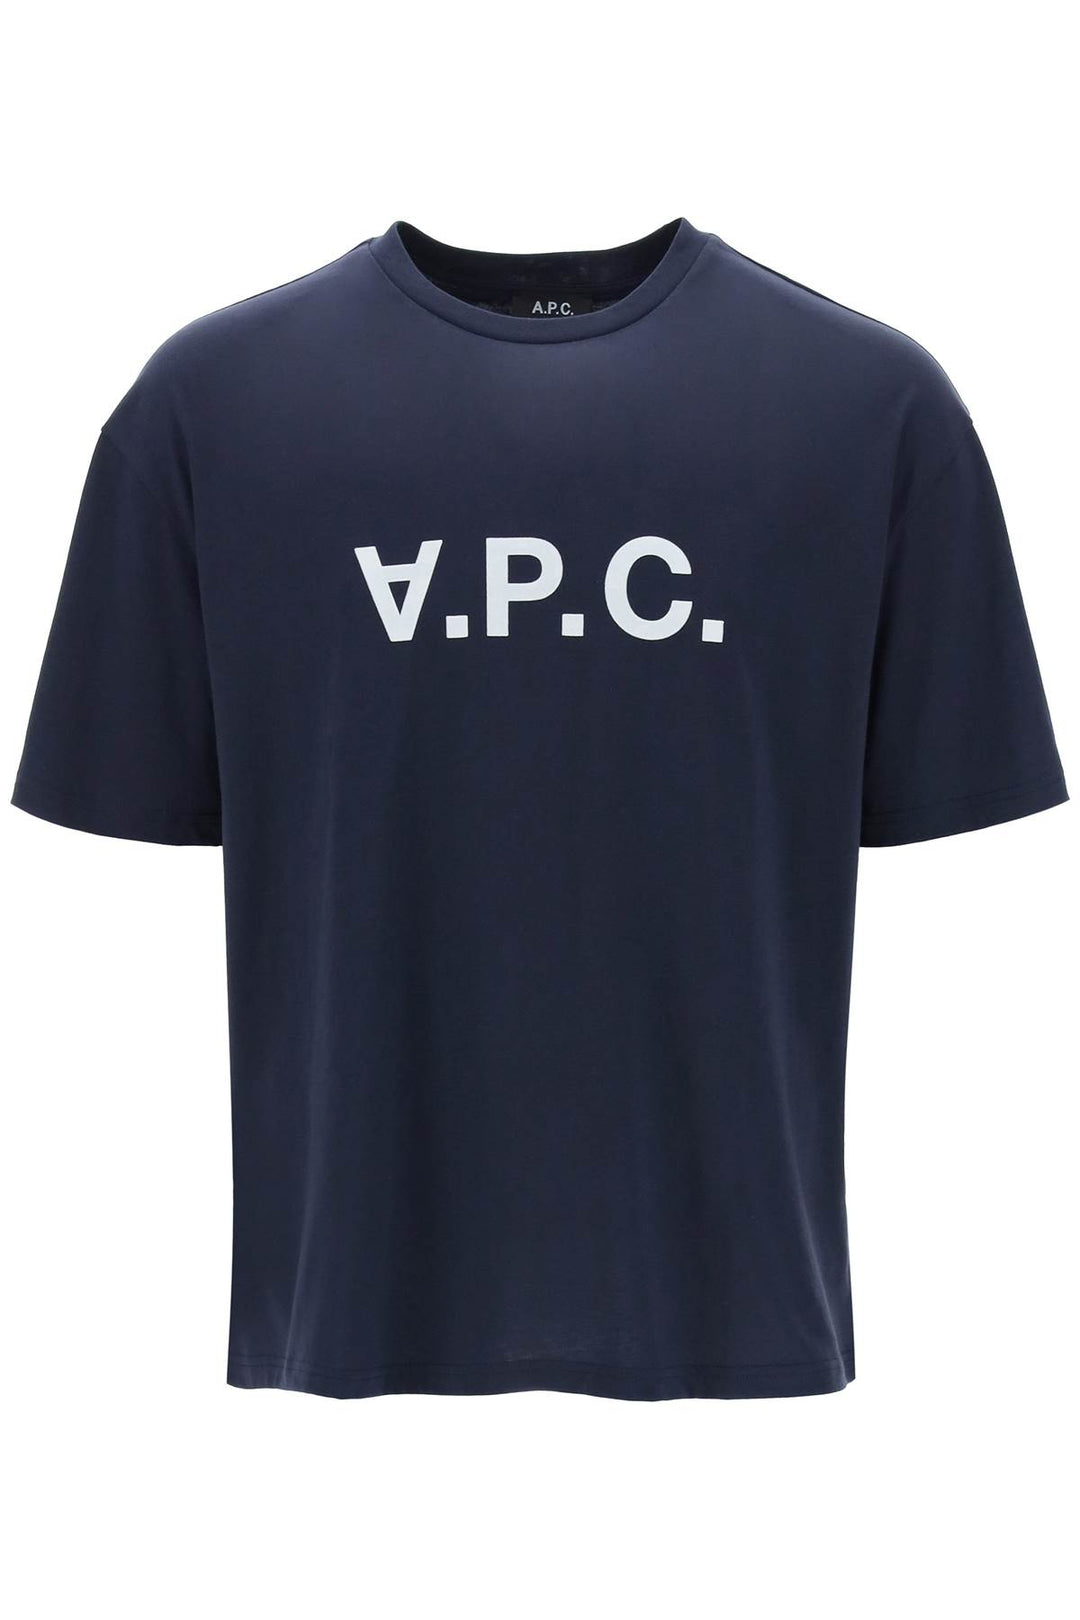 A.P.C. River T Shirt With Flocked Logo   Blu